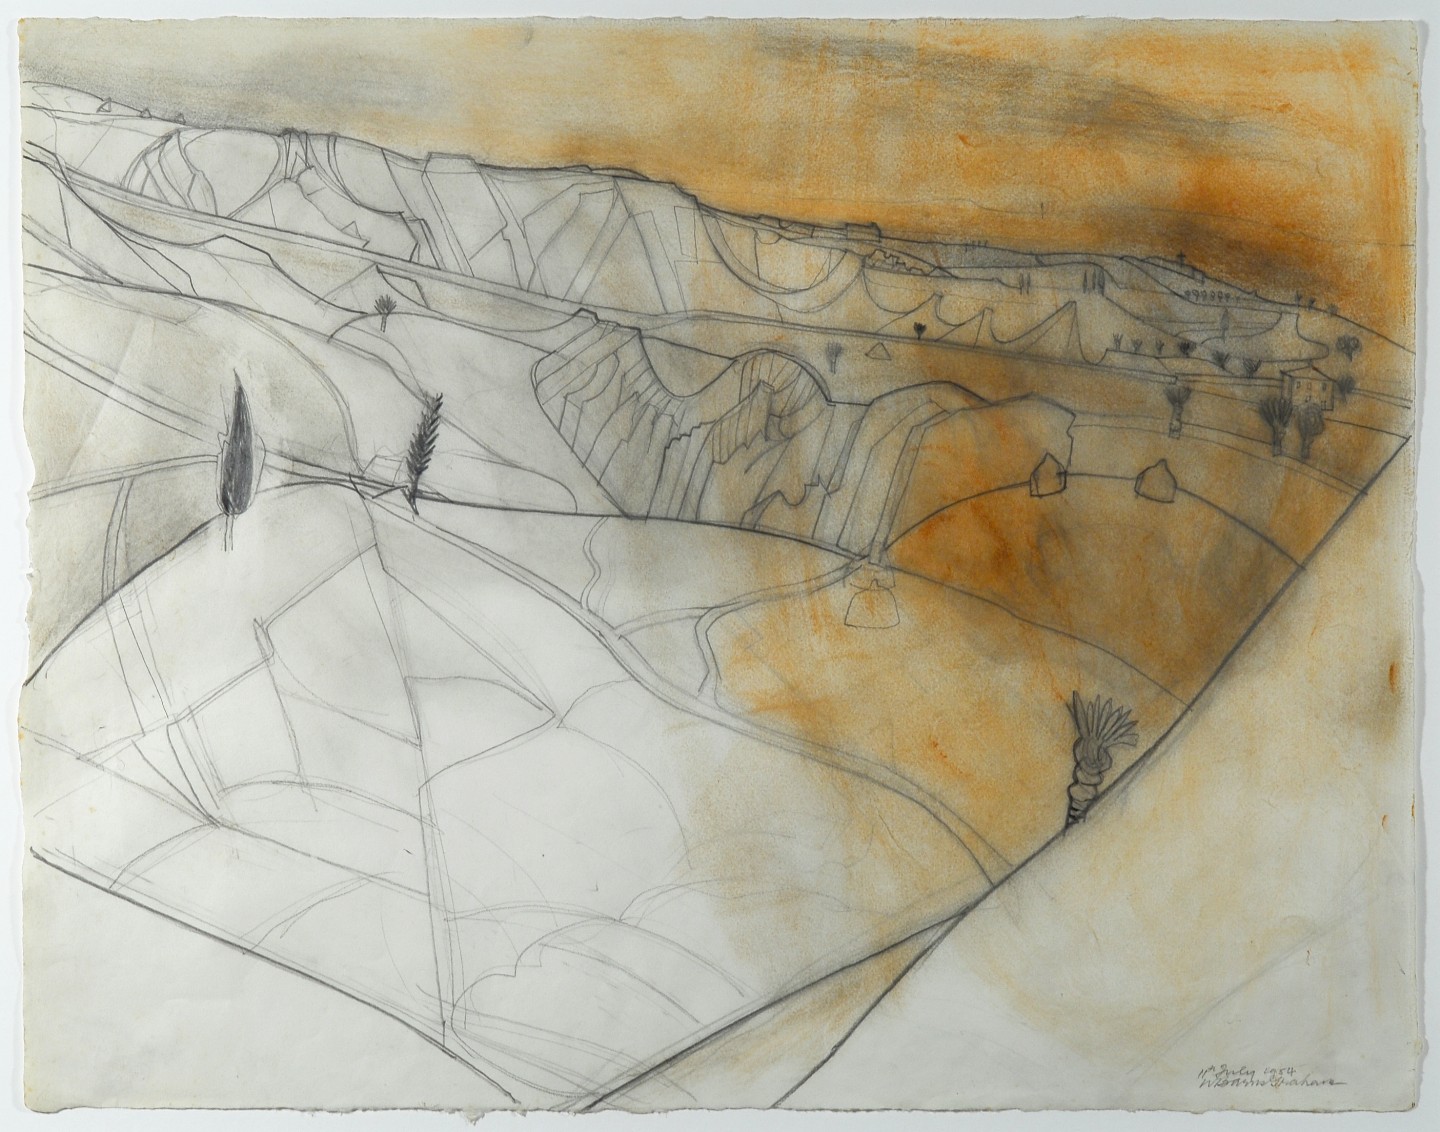 Evening, July, 1954, pencil on tempera on paper,